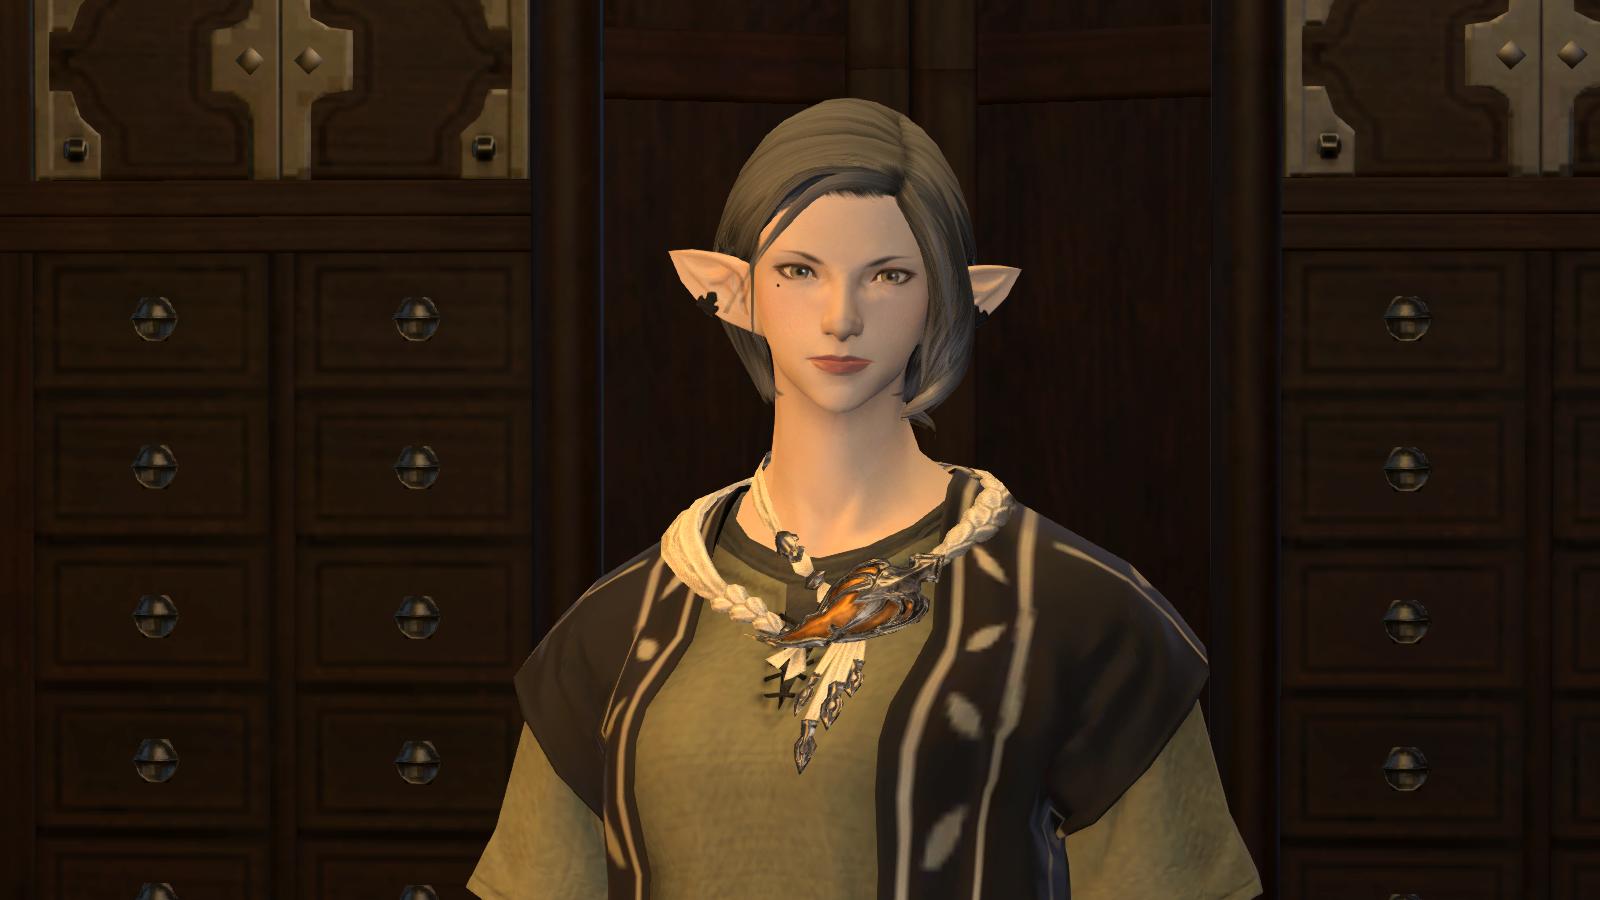 FFXIV Account Holders Get Items for Their Sweethearts in Valentione Event